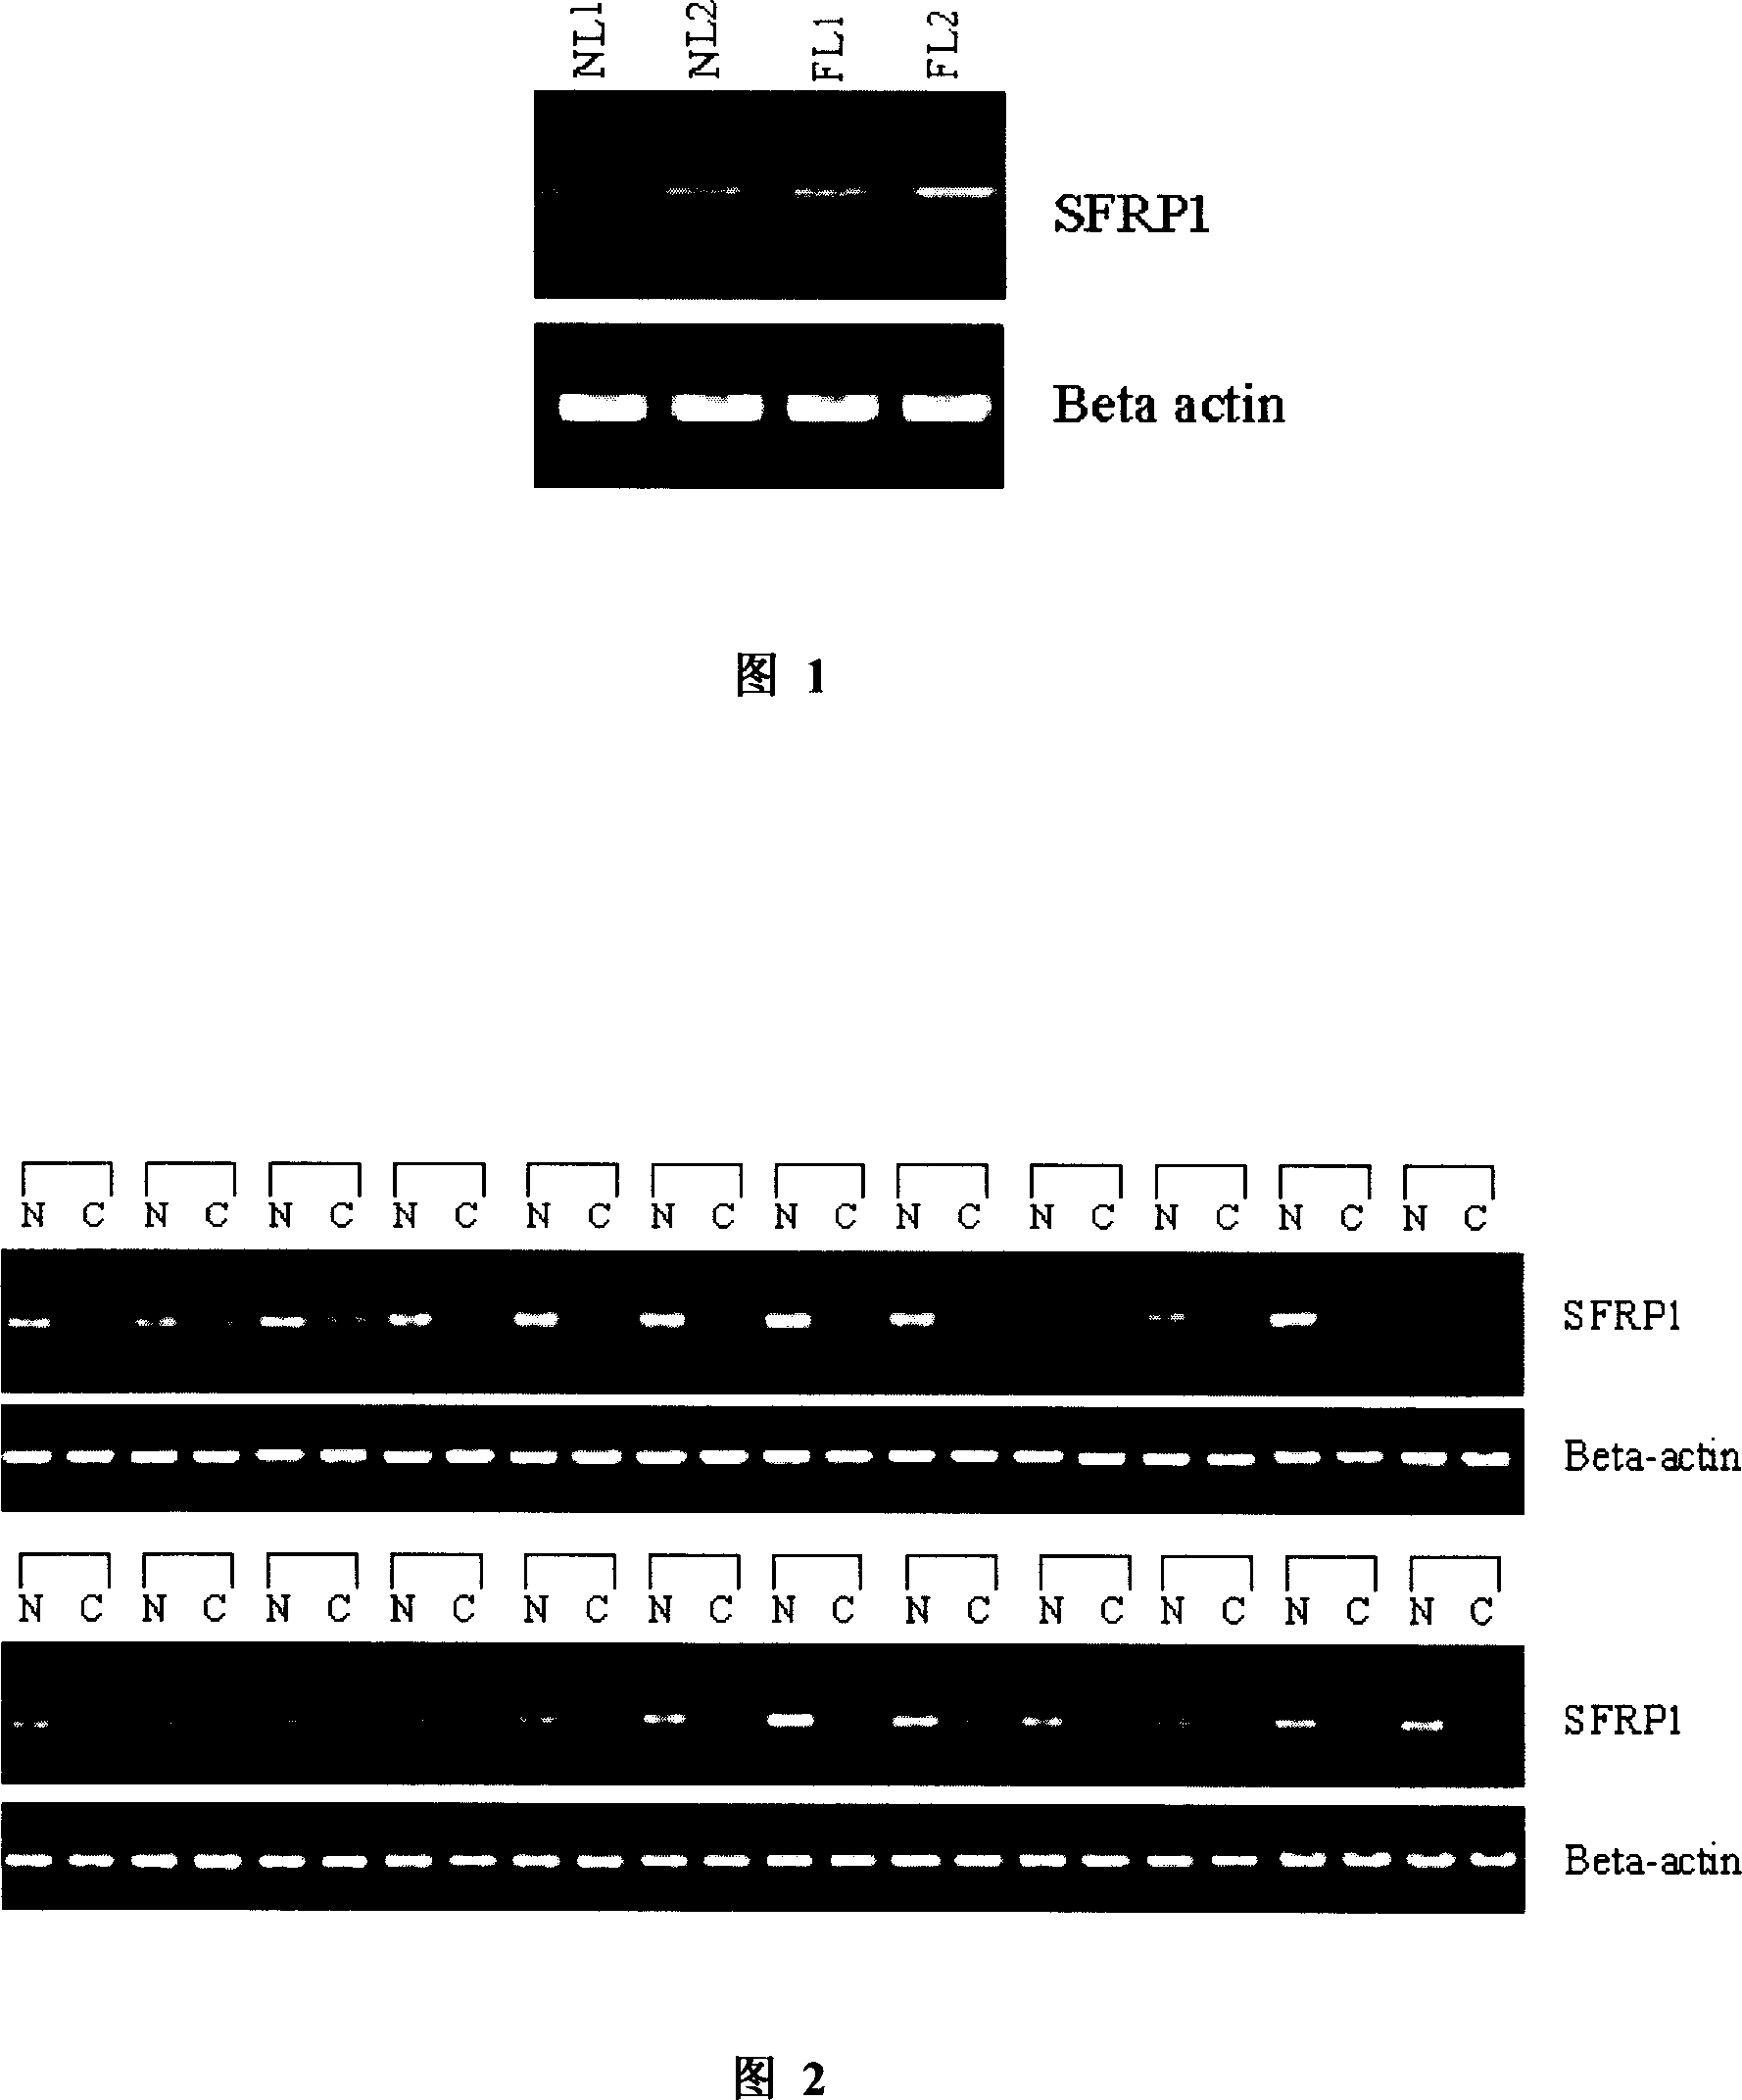 Human SFRP1 gene, its coded protein and application